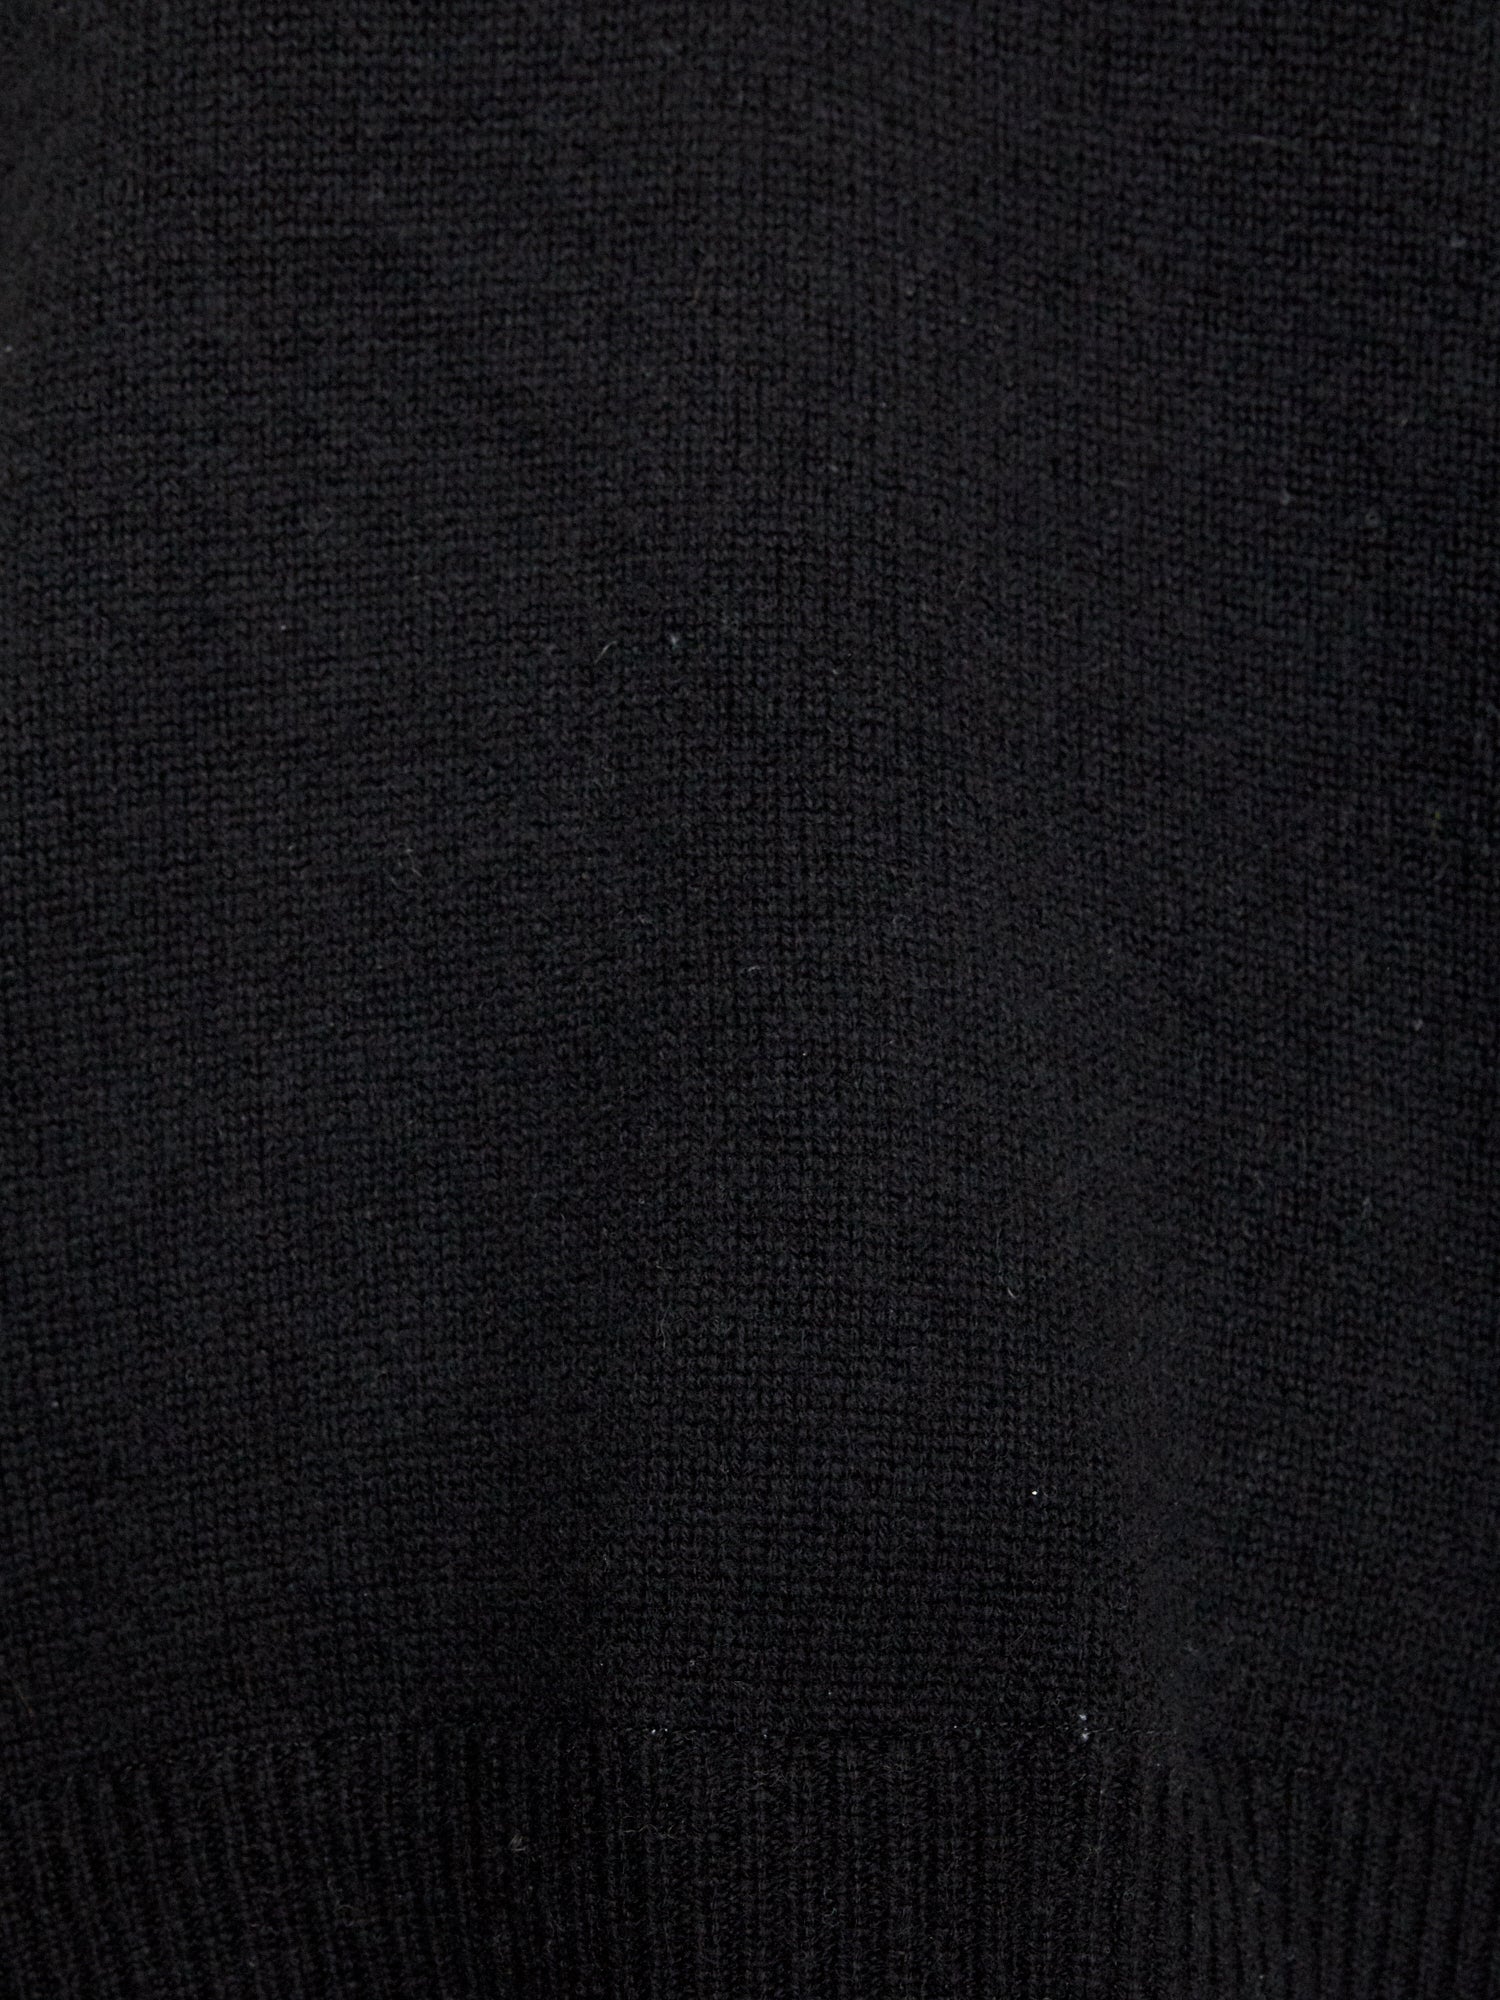 Looker black layered v-neck sweater close up